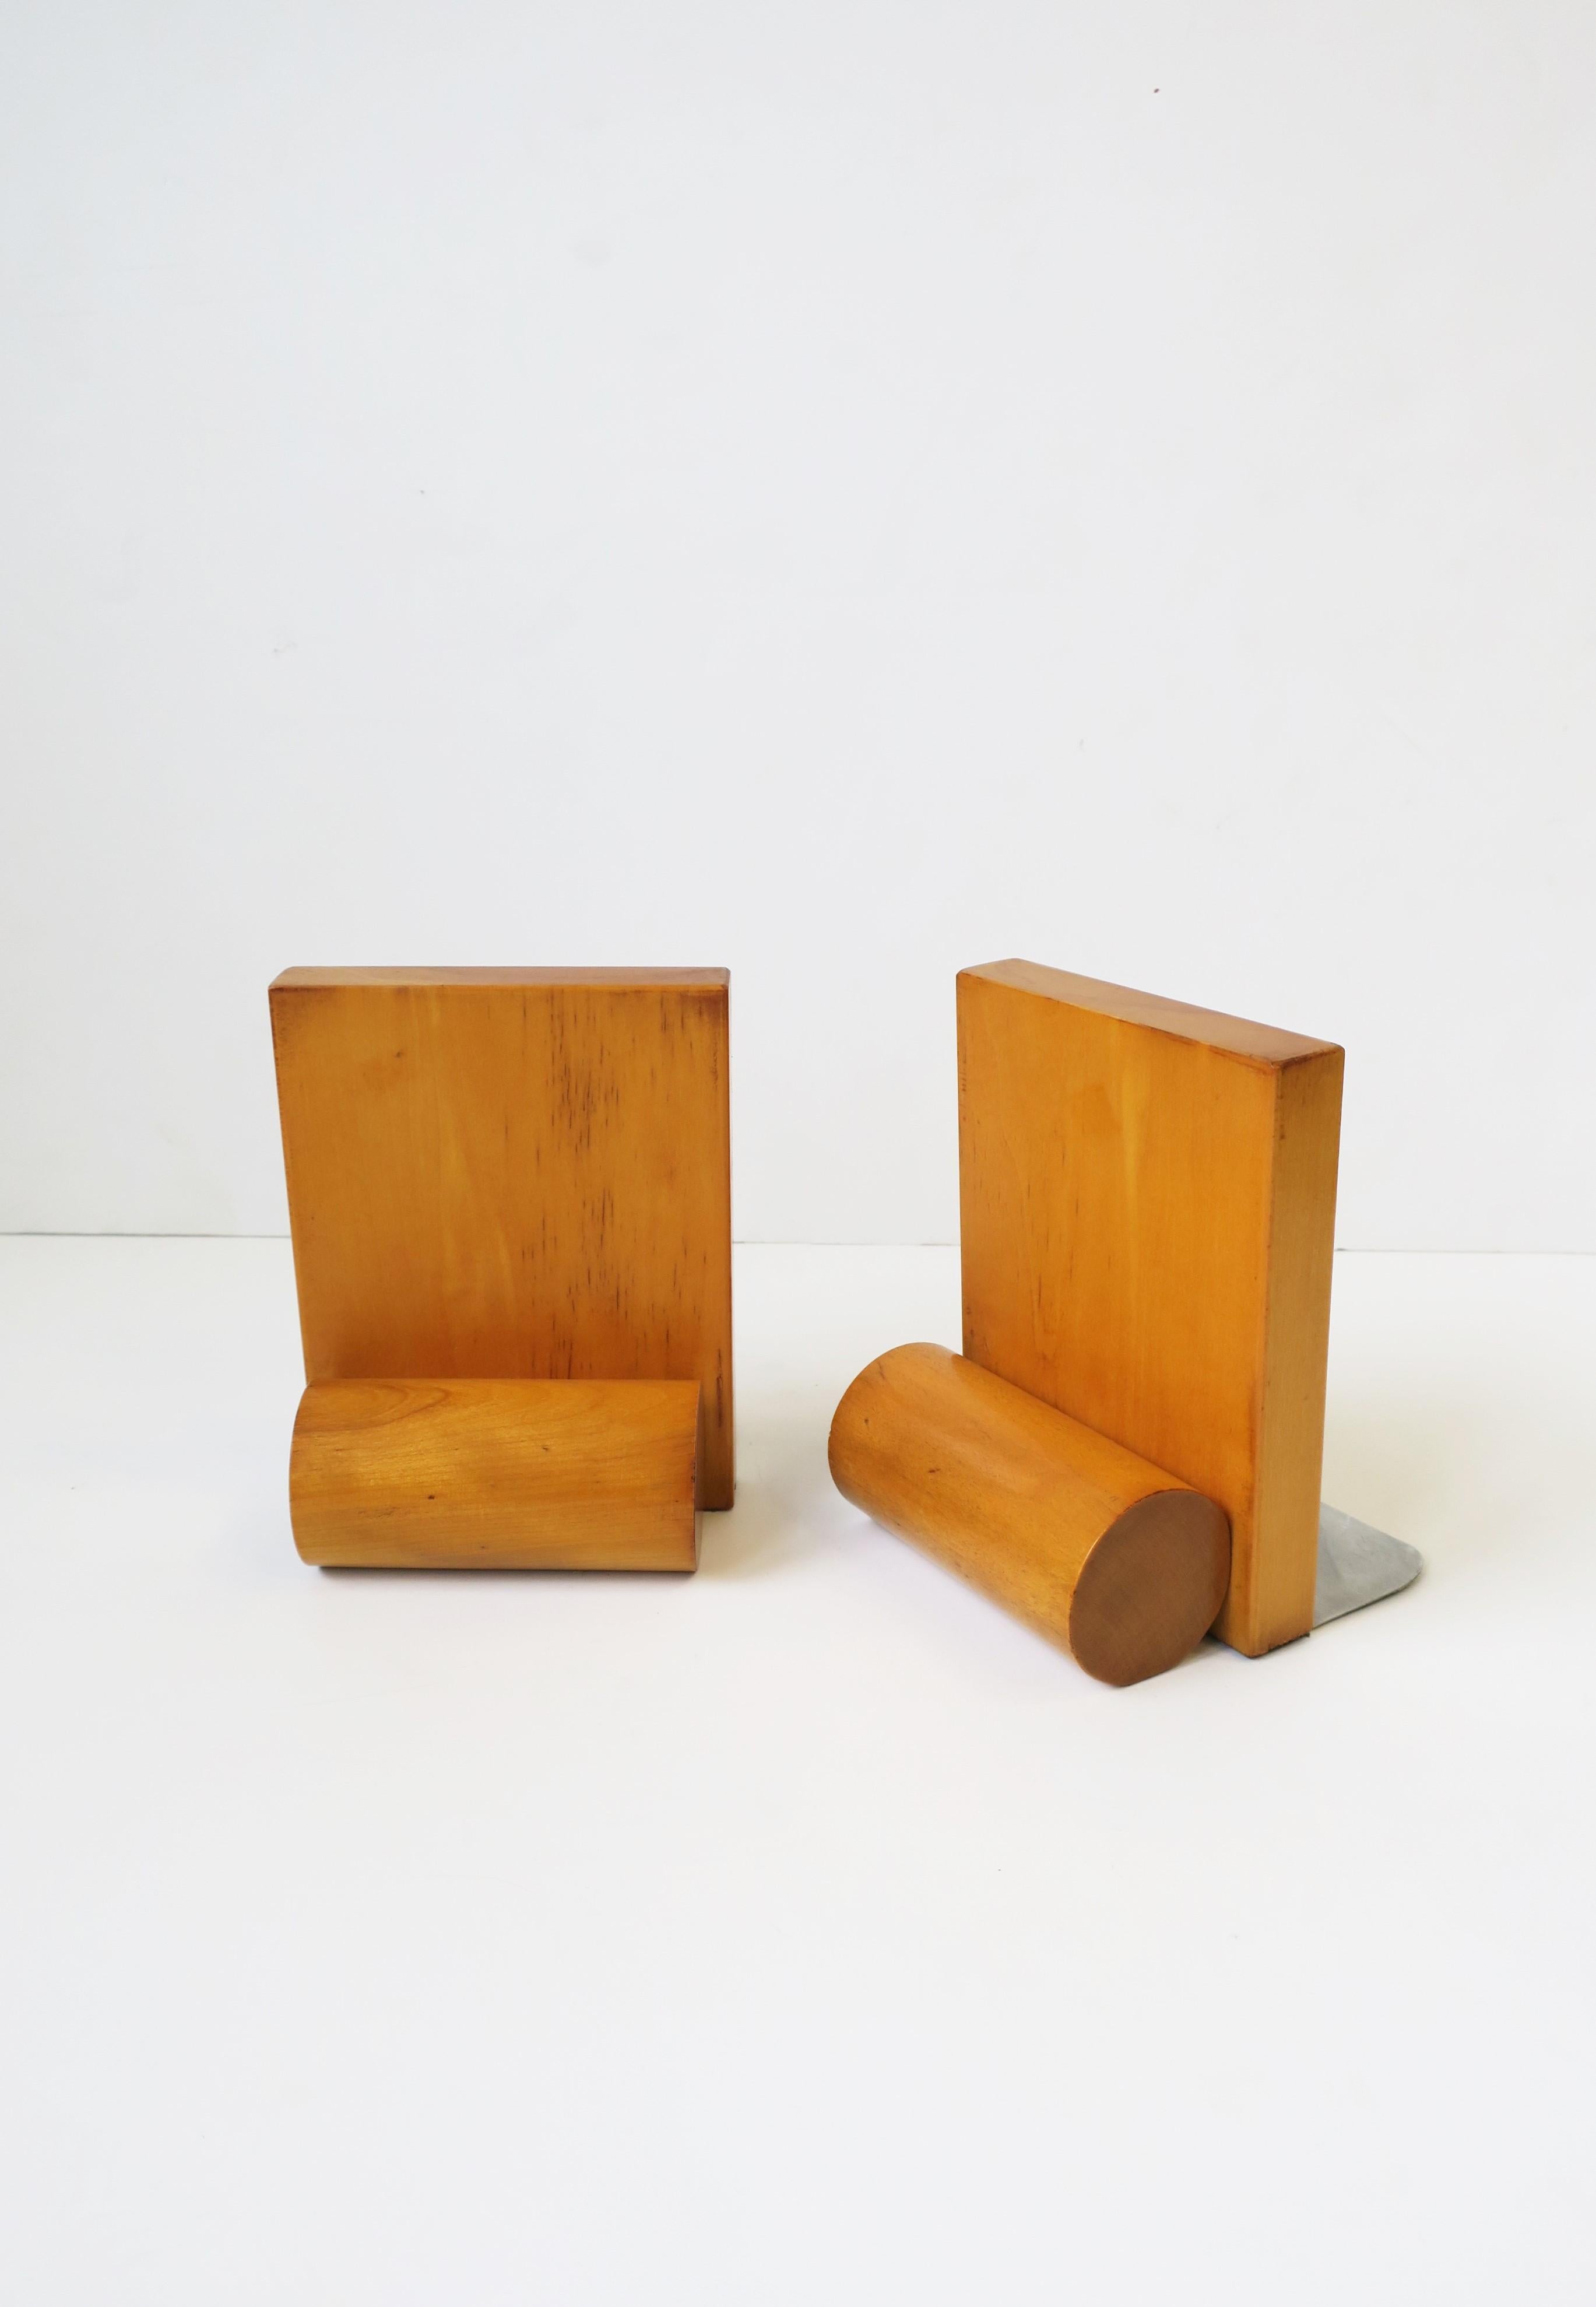 A pair of Art Deco modern oak or maple wood bookends, circa early to mid-20th century. Dimensions: 4.5